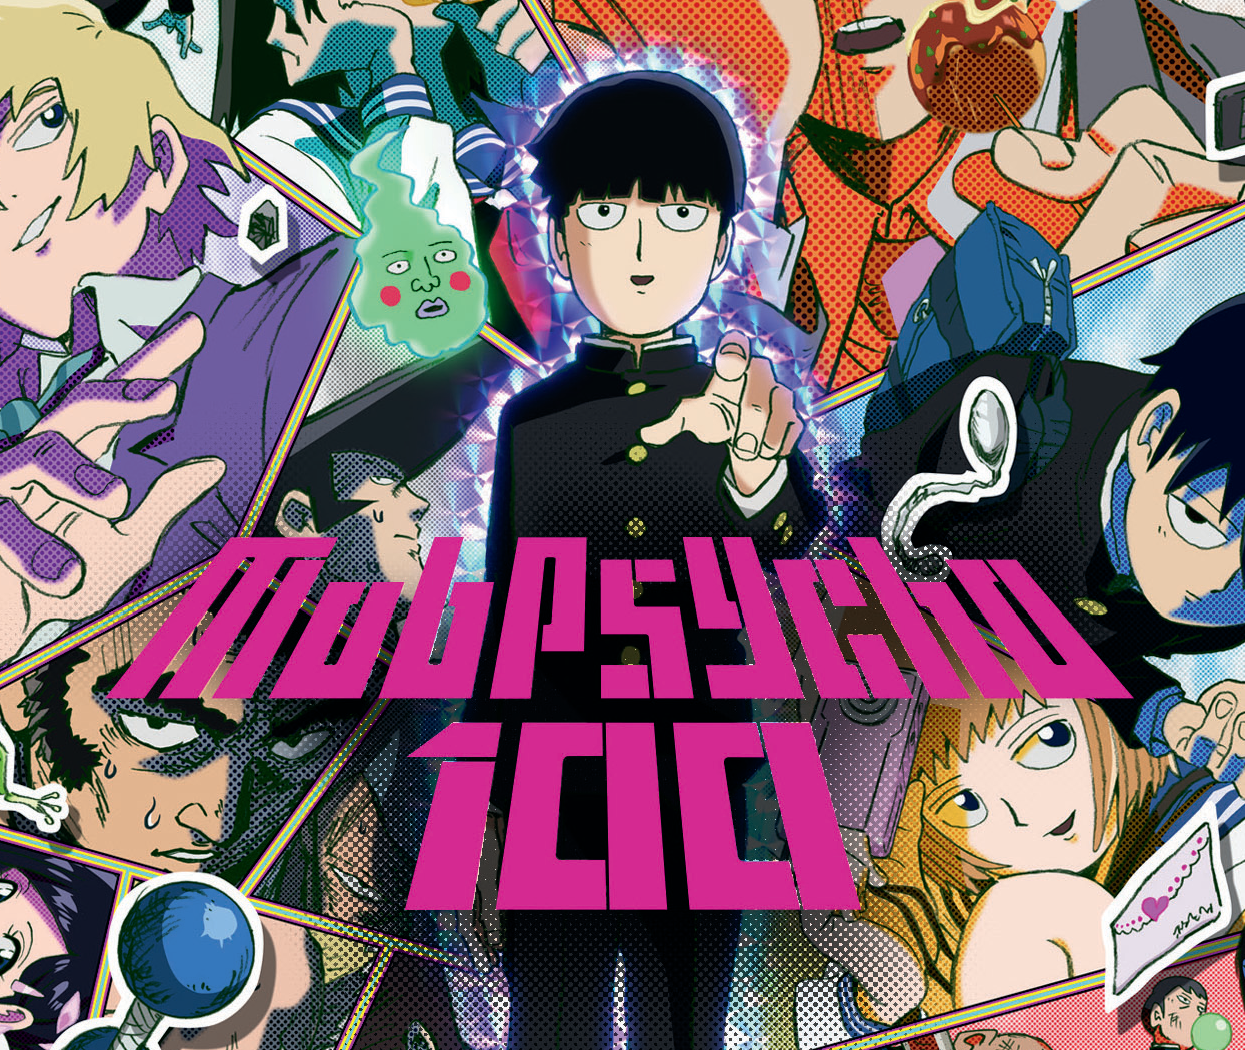 Psychic Power Surge - A Moment From Mob Psycho 100